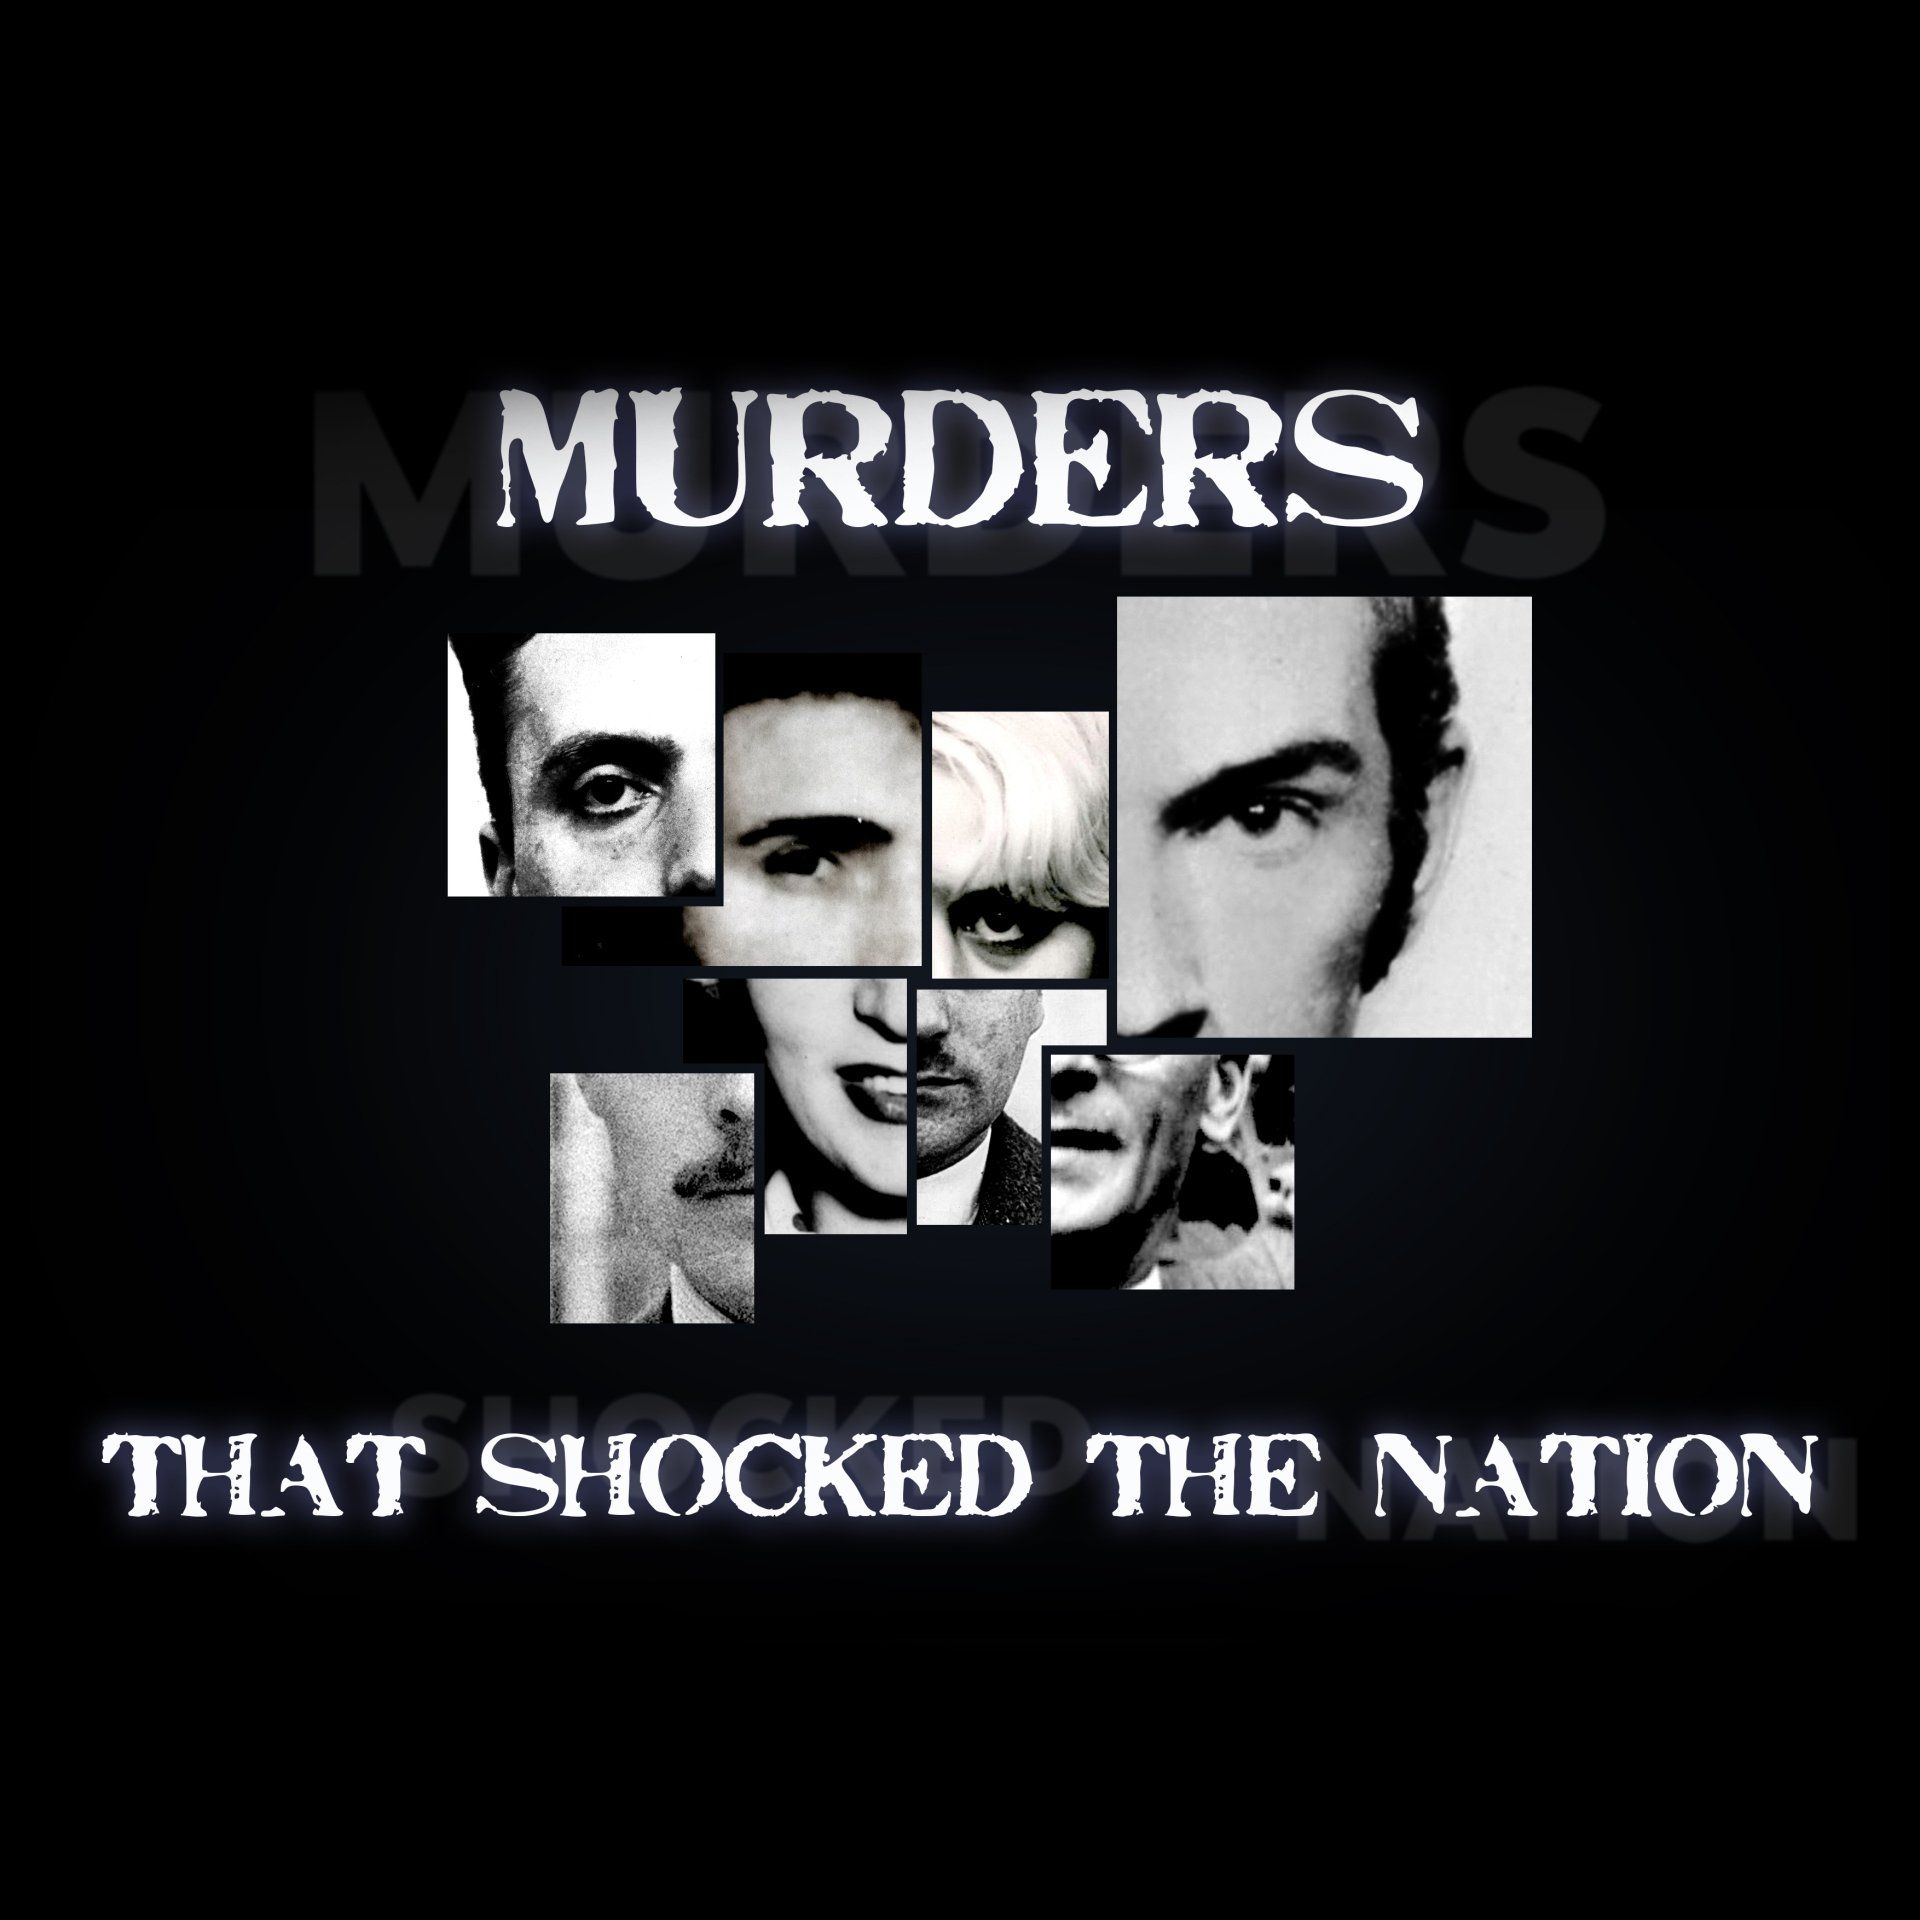 Murders that shocked a nation from Woodcut Media will be on the live stage at CrimeCon UK